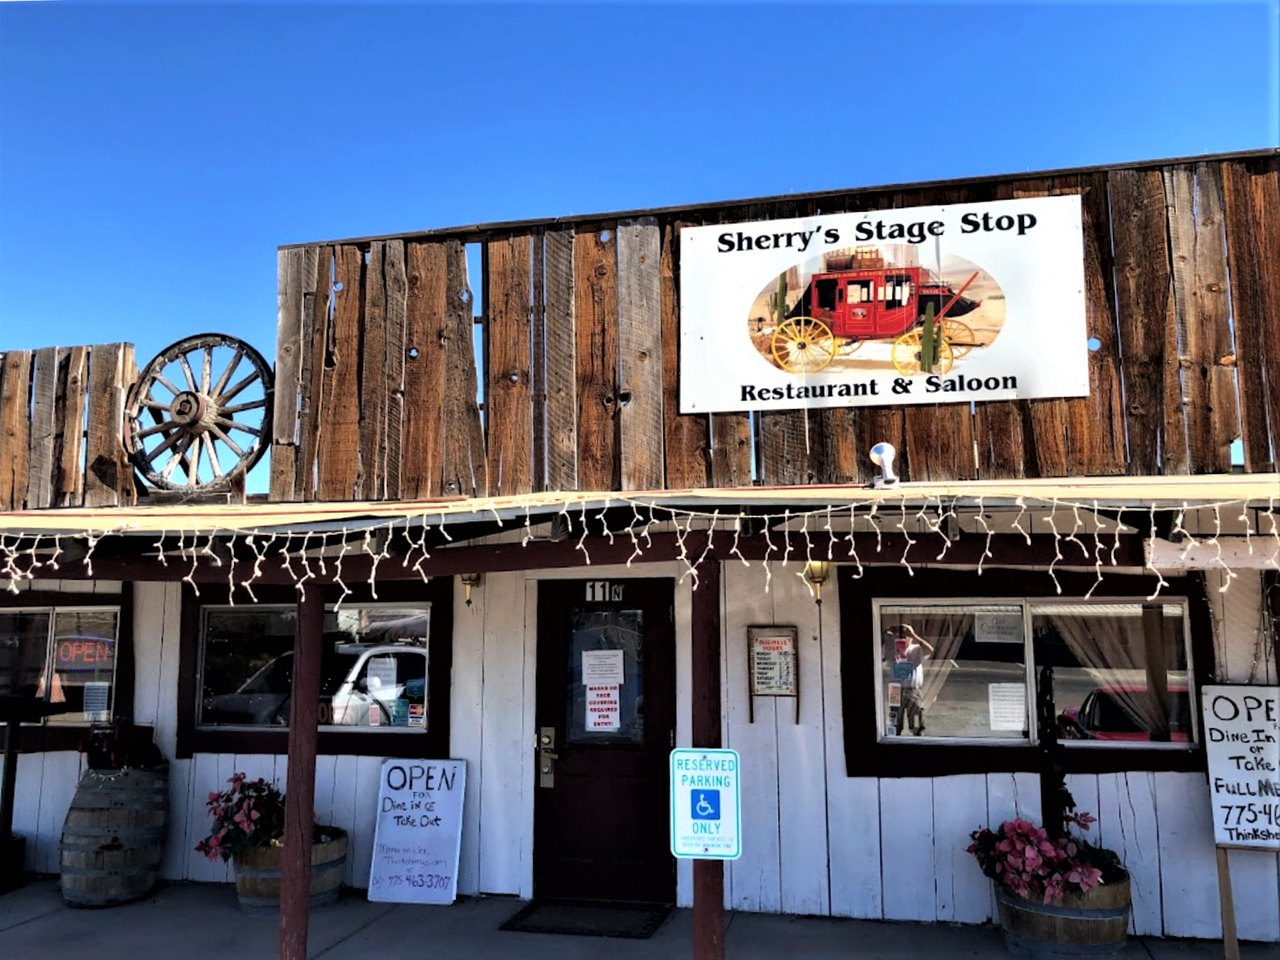 This Humble Little Restaurant In Small Town Nevada Is So Old Fashioned, It Doesn't Even Have A Website